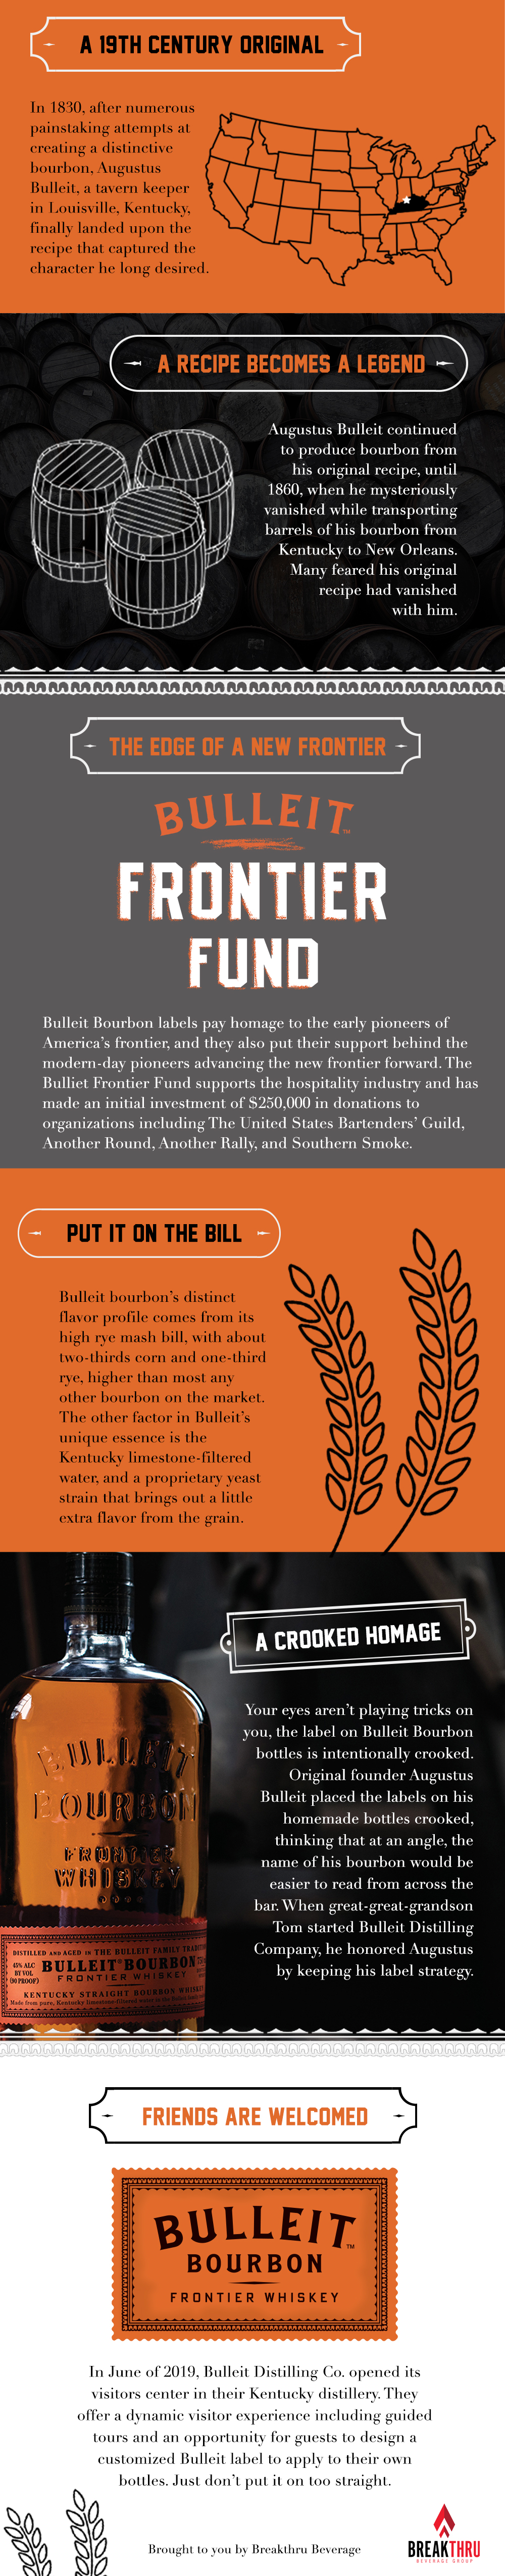 So you think you know Bulleit fun facts